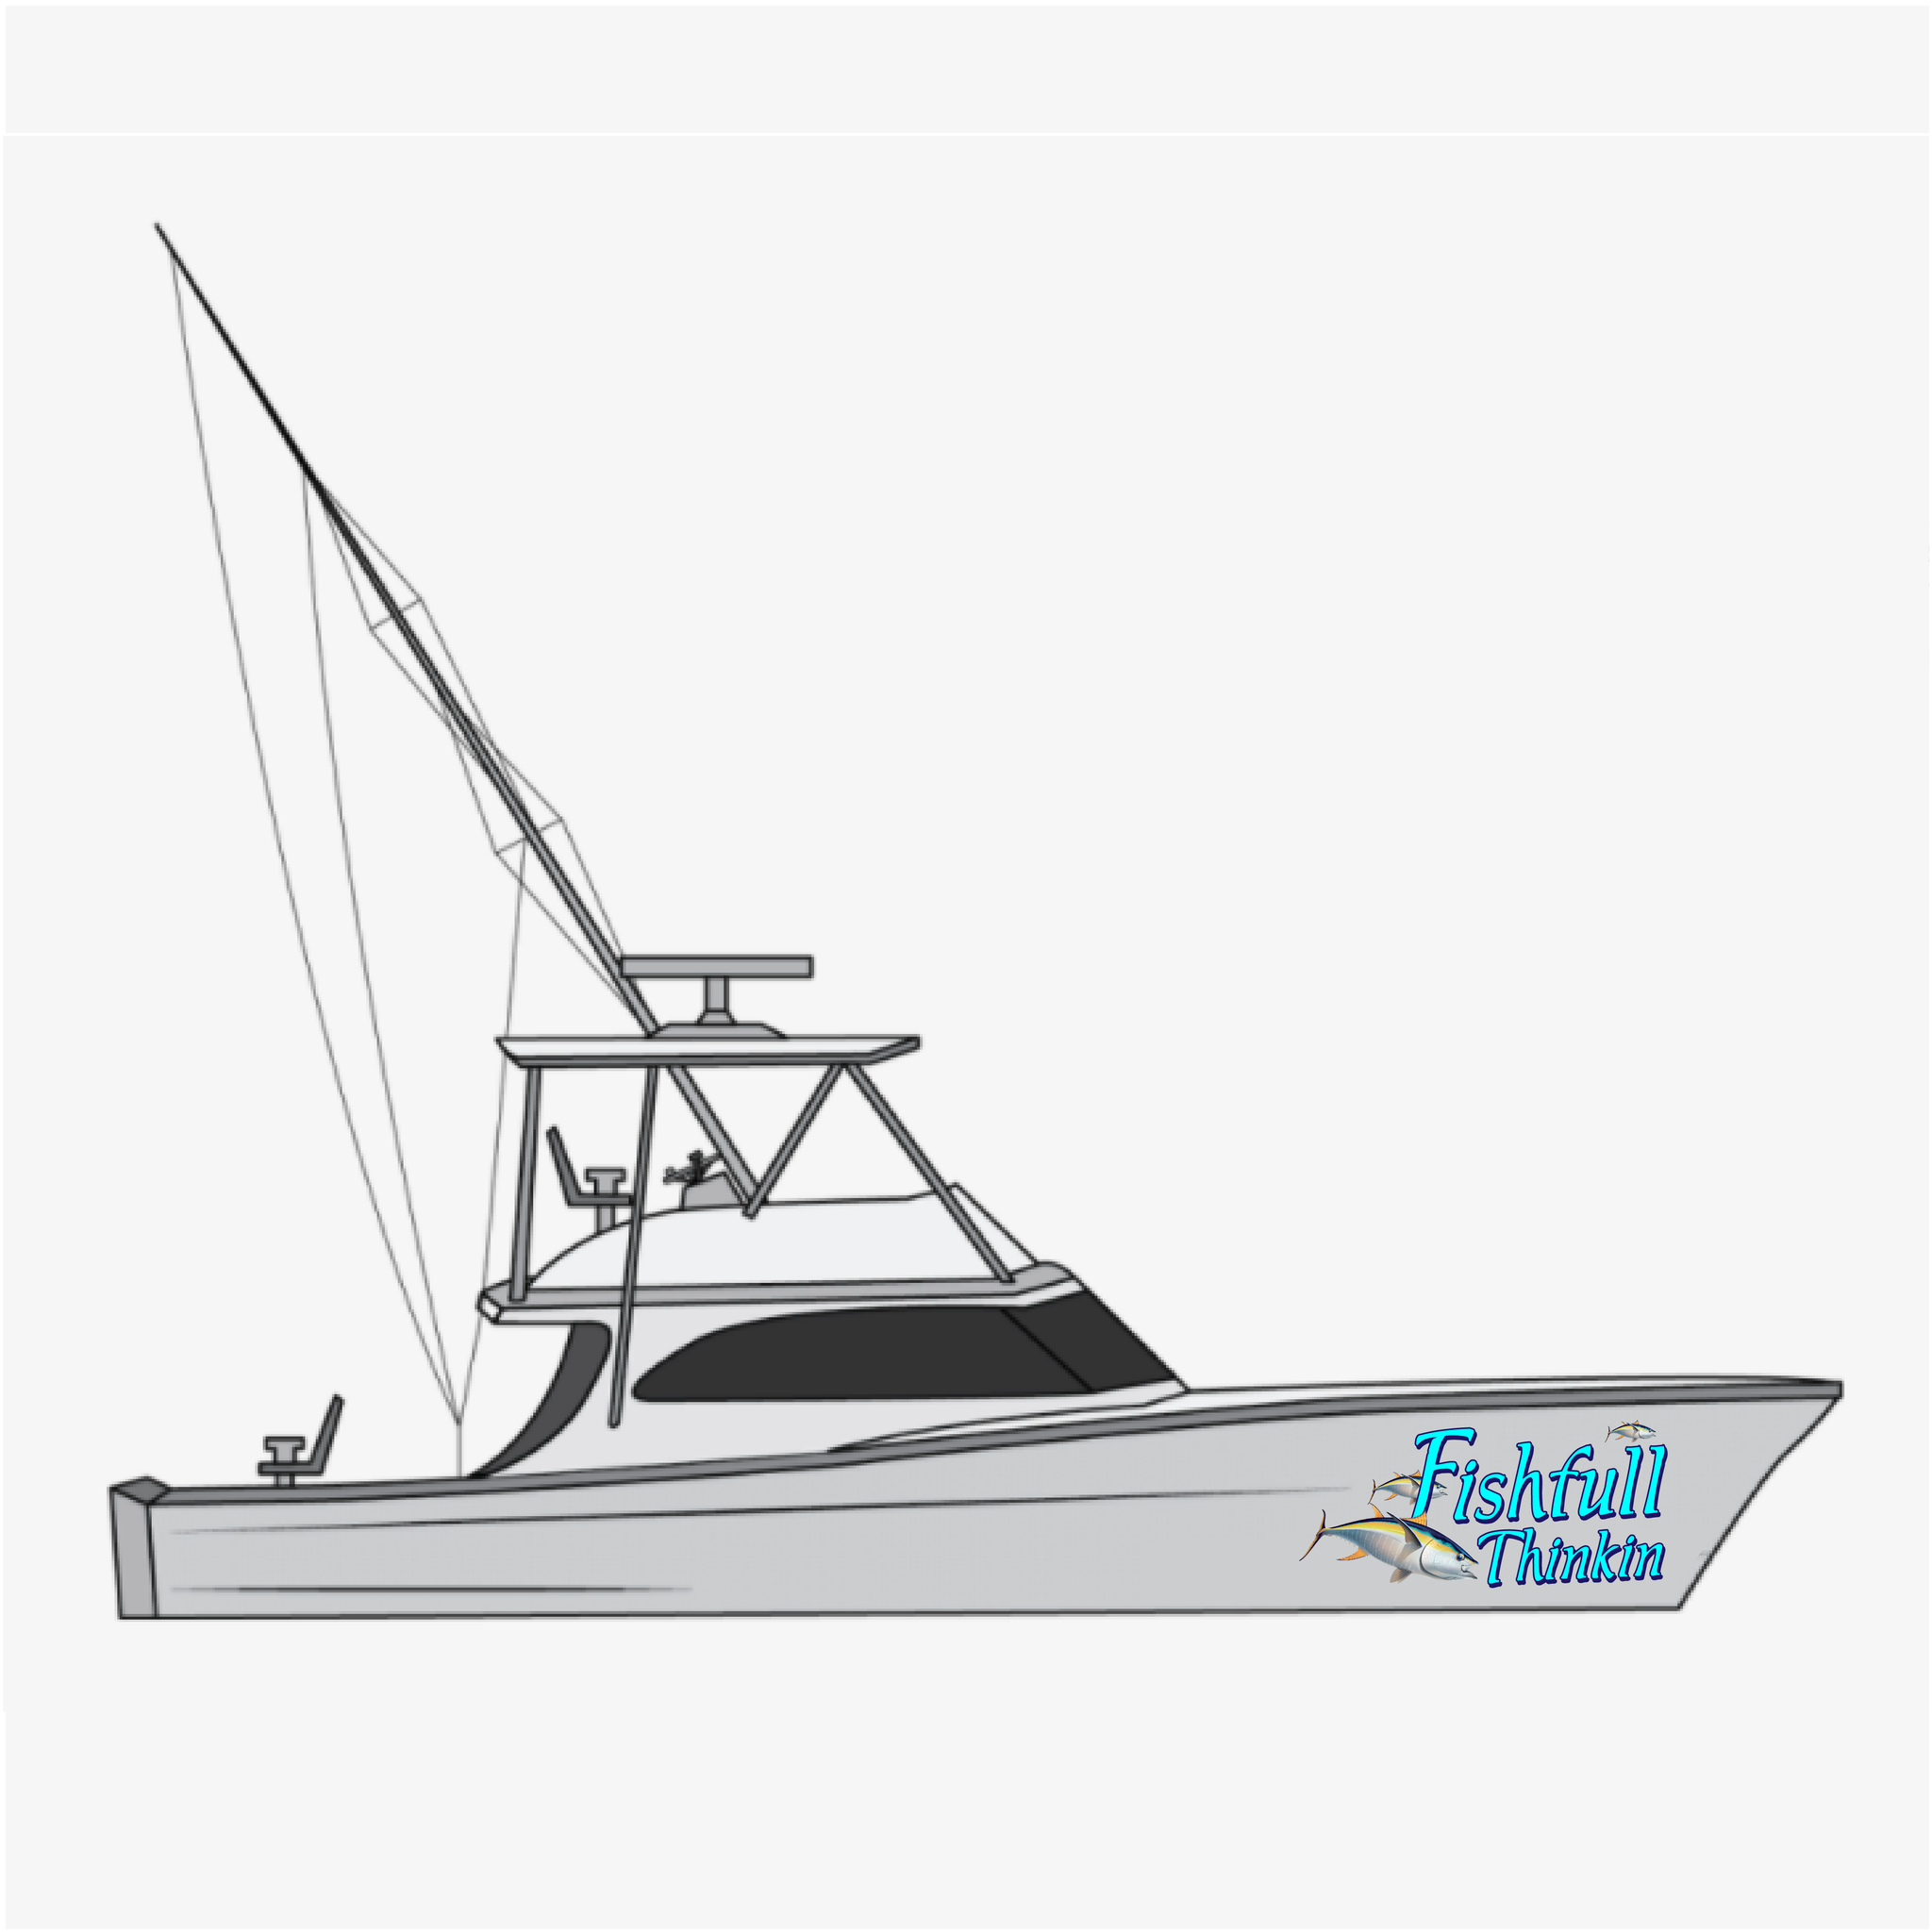 Fish Graphics & Stickers for Boats - Boat Names Australia